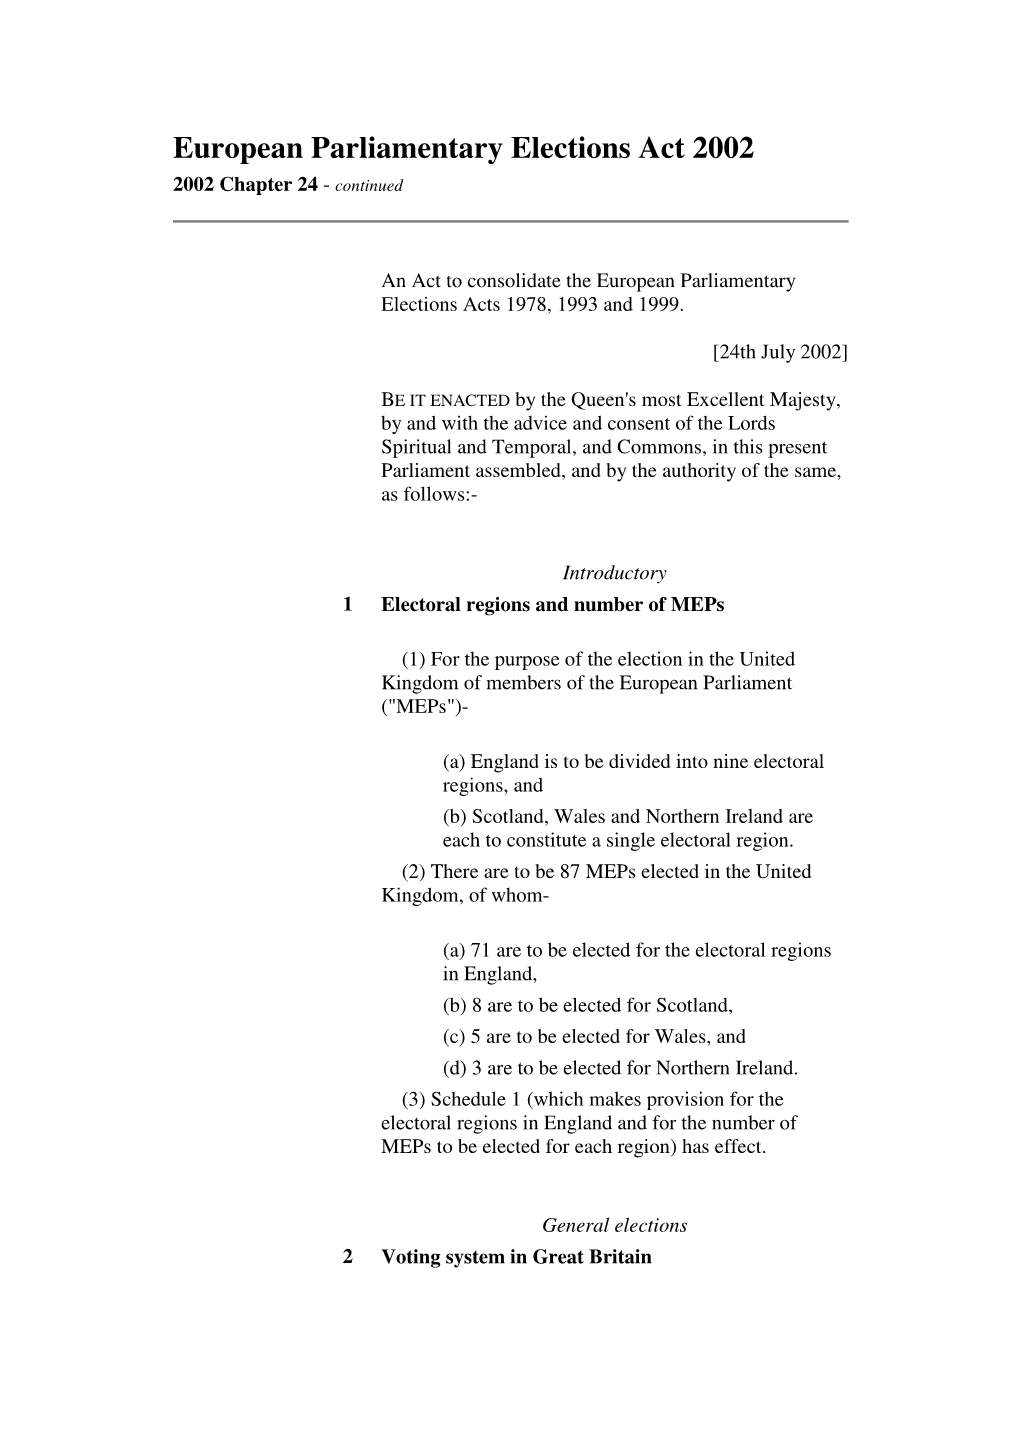 European Parliamentary Elections Act 2002 2002 Chapter 24 - Continued